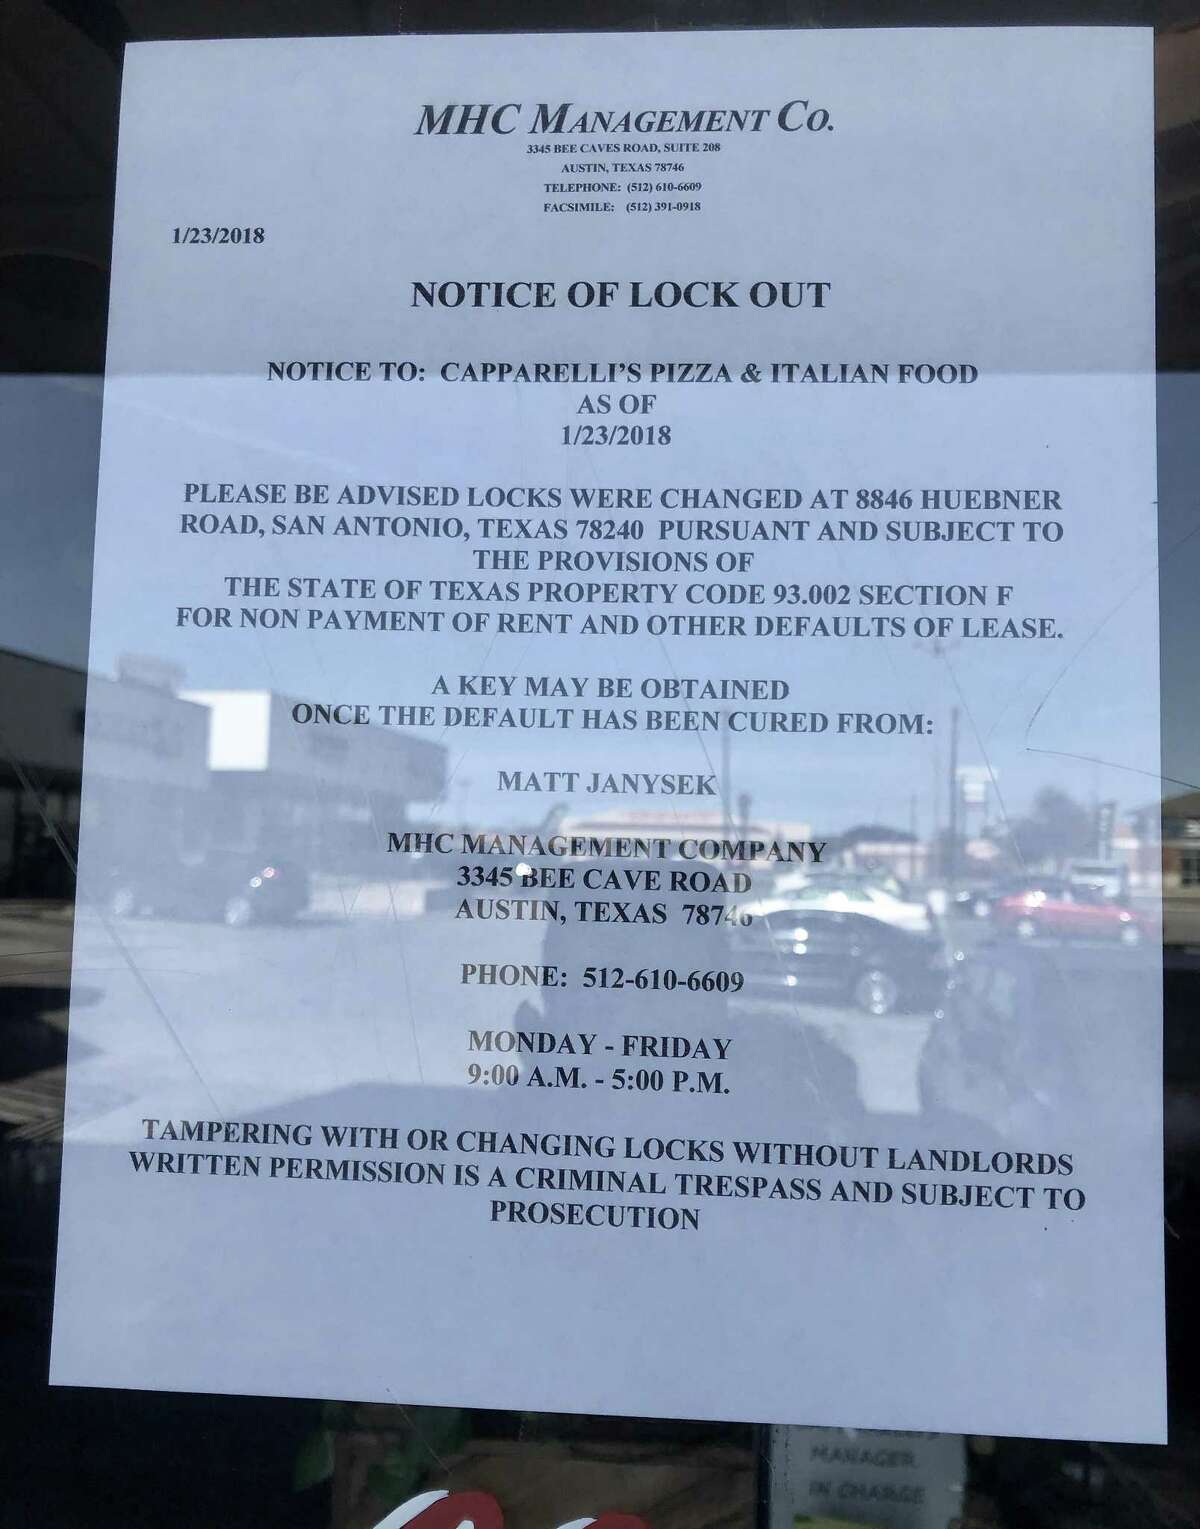 A notice of lockout was placed on the door of the Capparelli's Pizza & Italian Food location on Tuesday at 8846 Huebner Road.